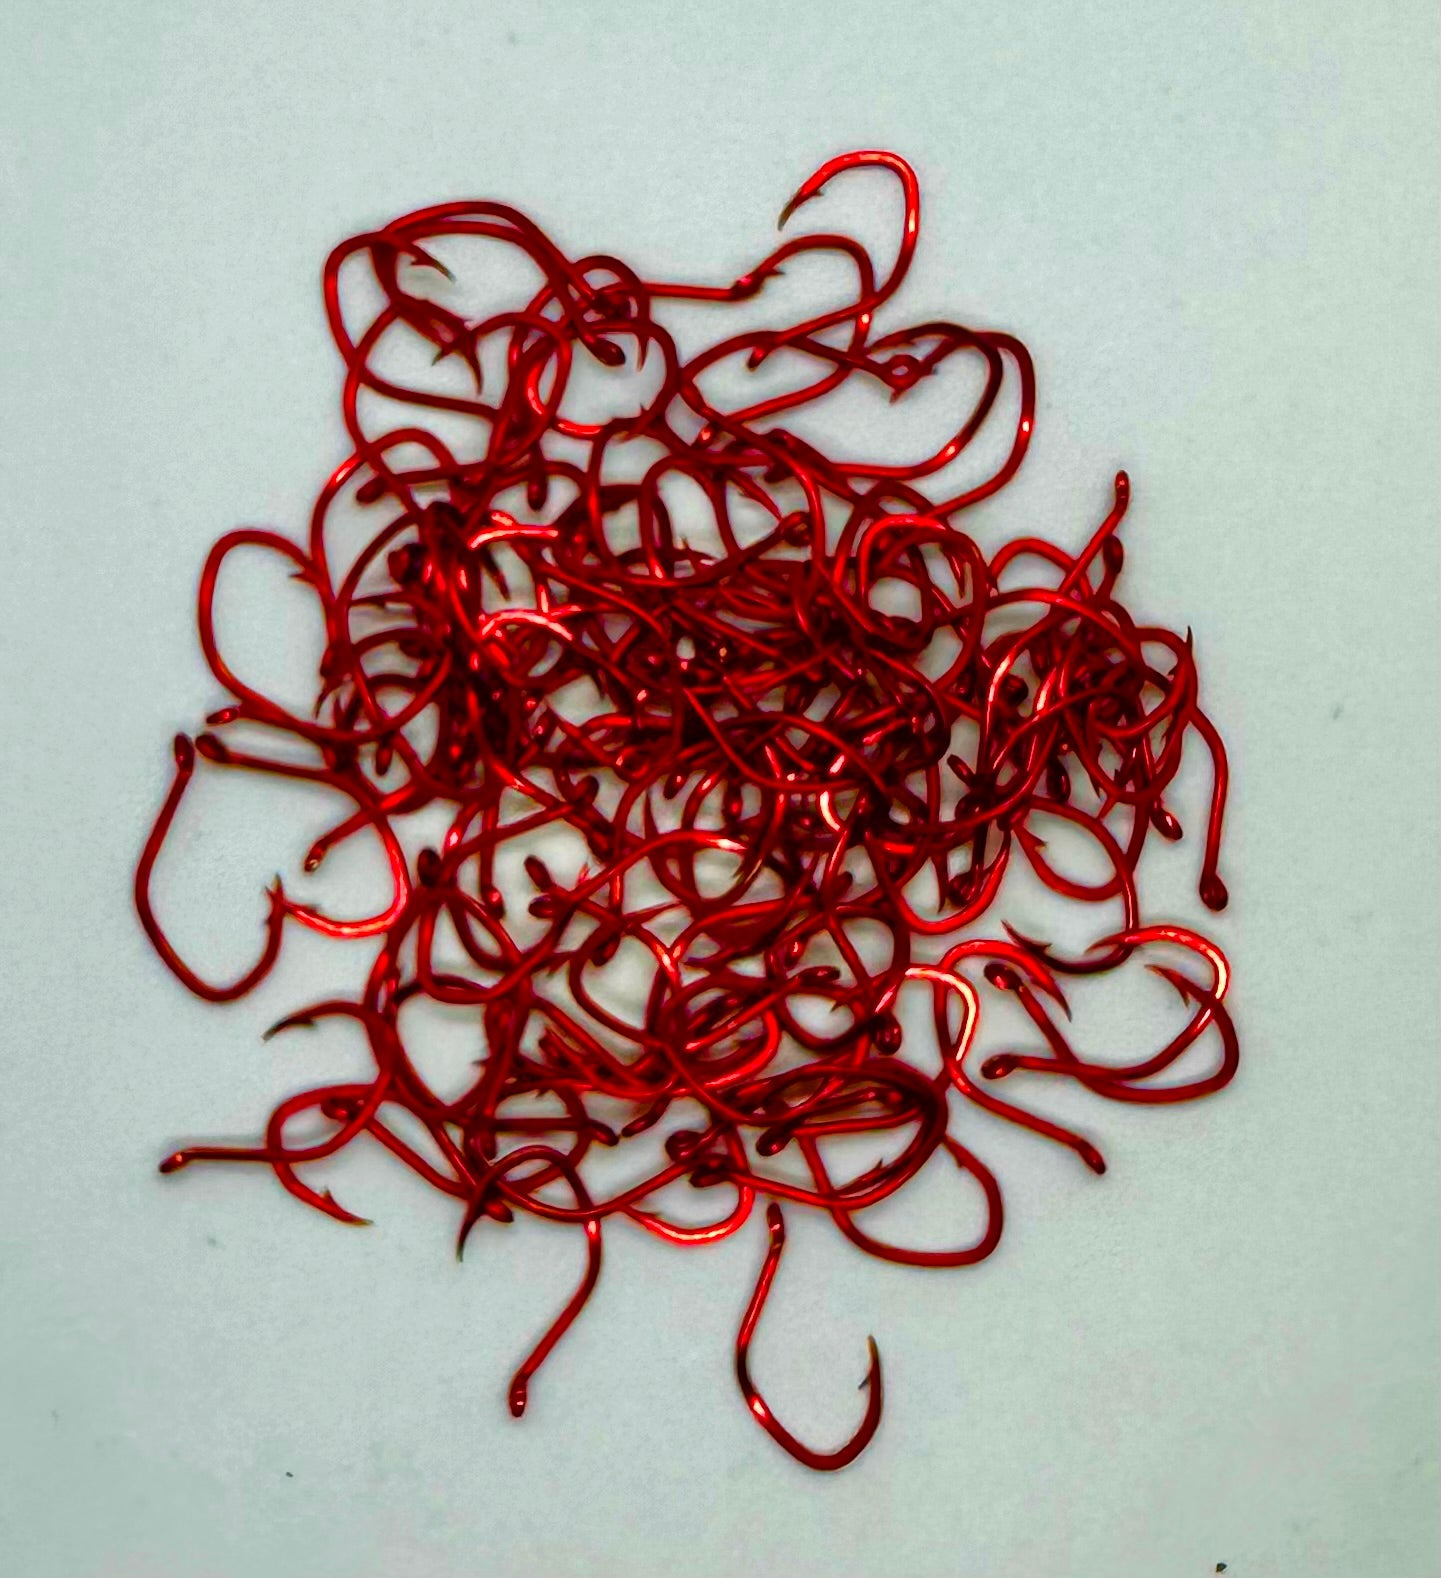 Hooks - Red Sickle Hooks - Size 2 - 100 Pack- Only $10.95